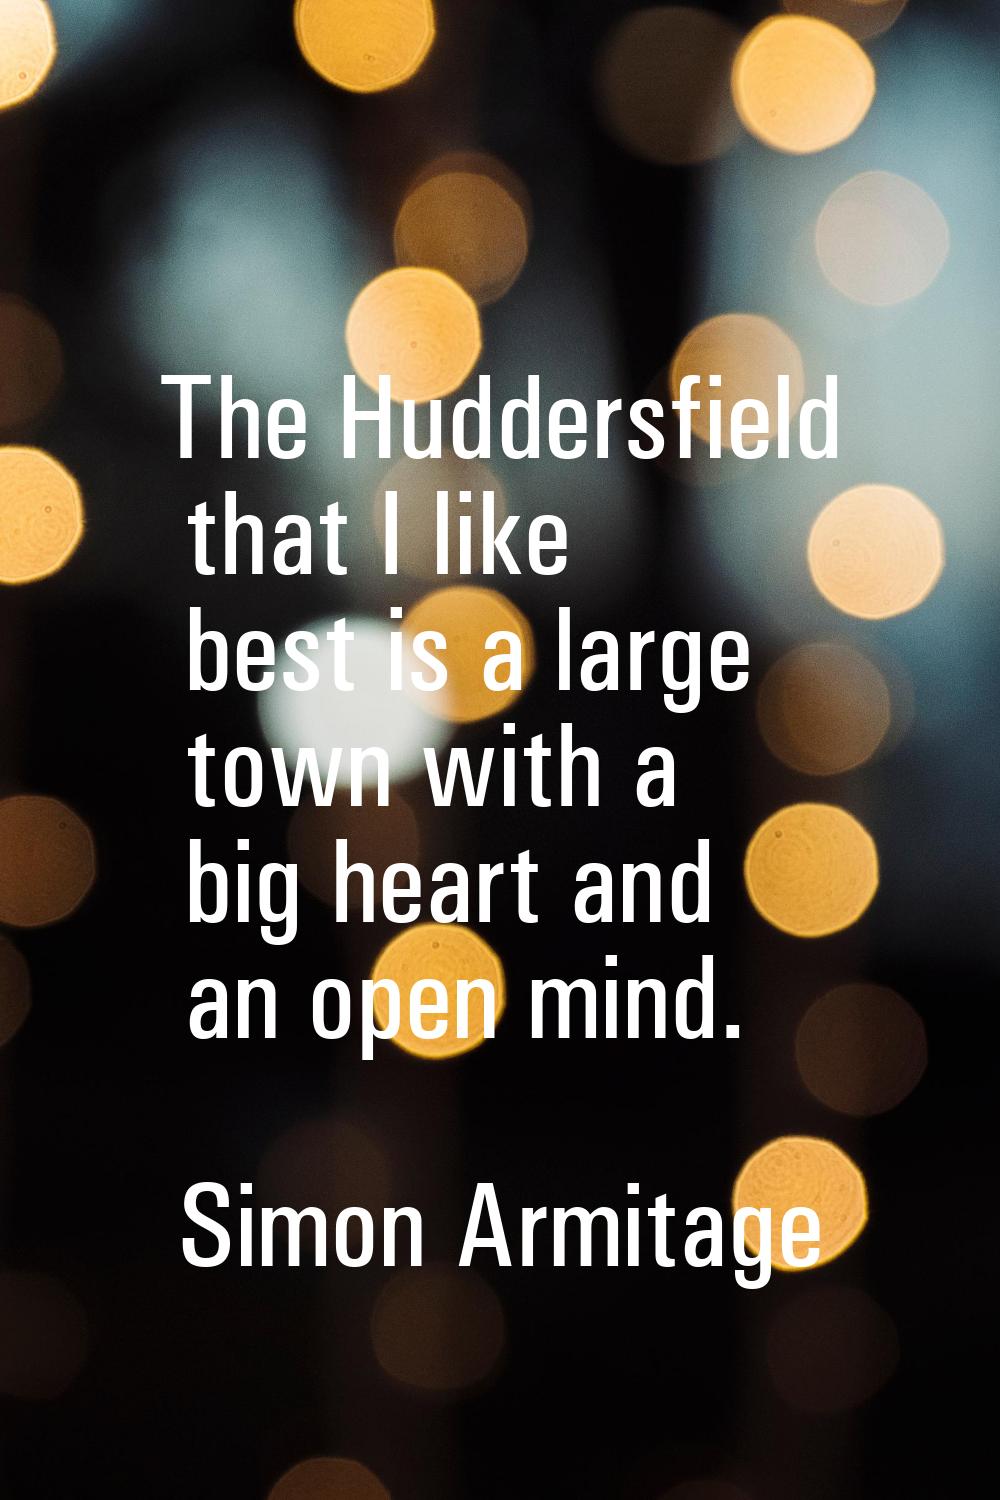 The Huddersfield that I like best is a large town with a big heart and an open mind.